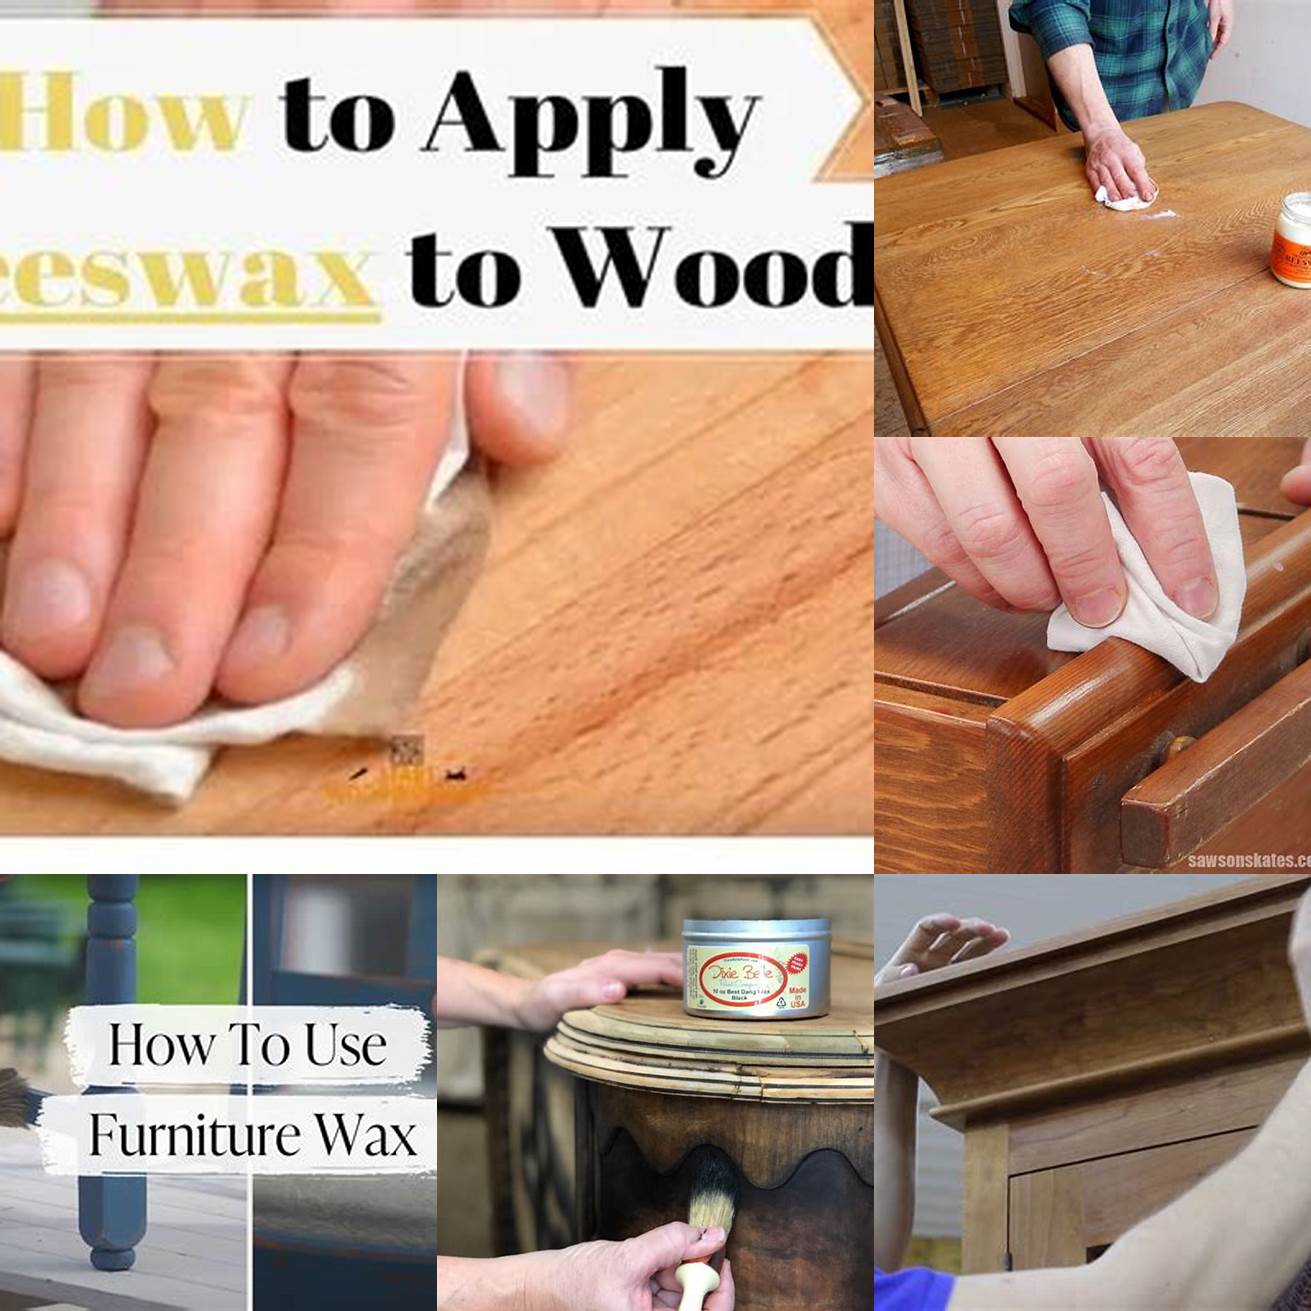 How to Apply Beeswax